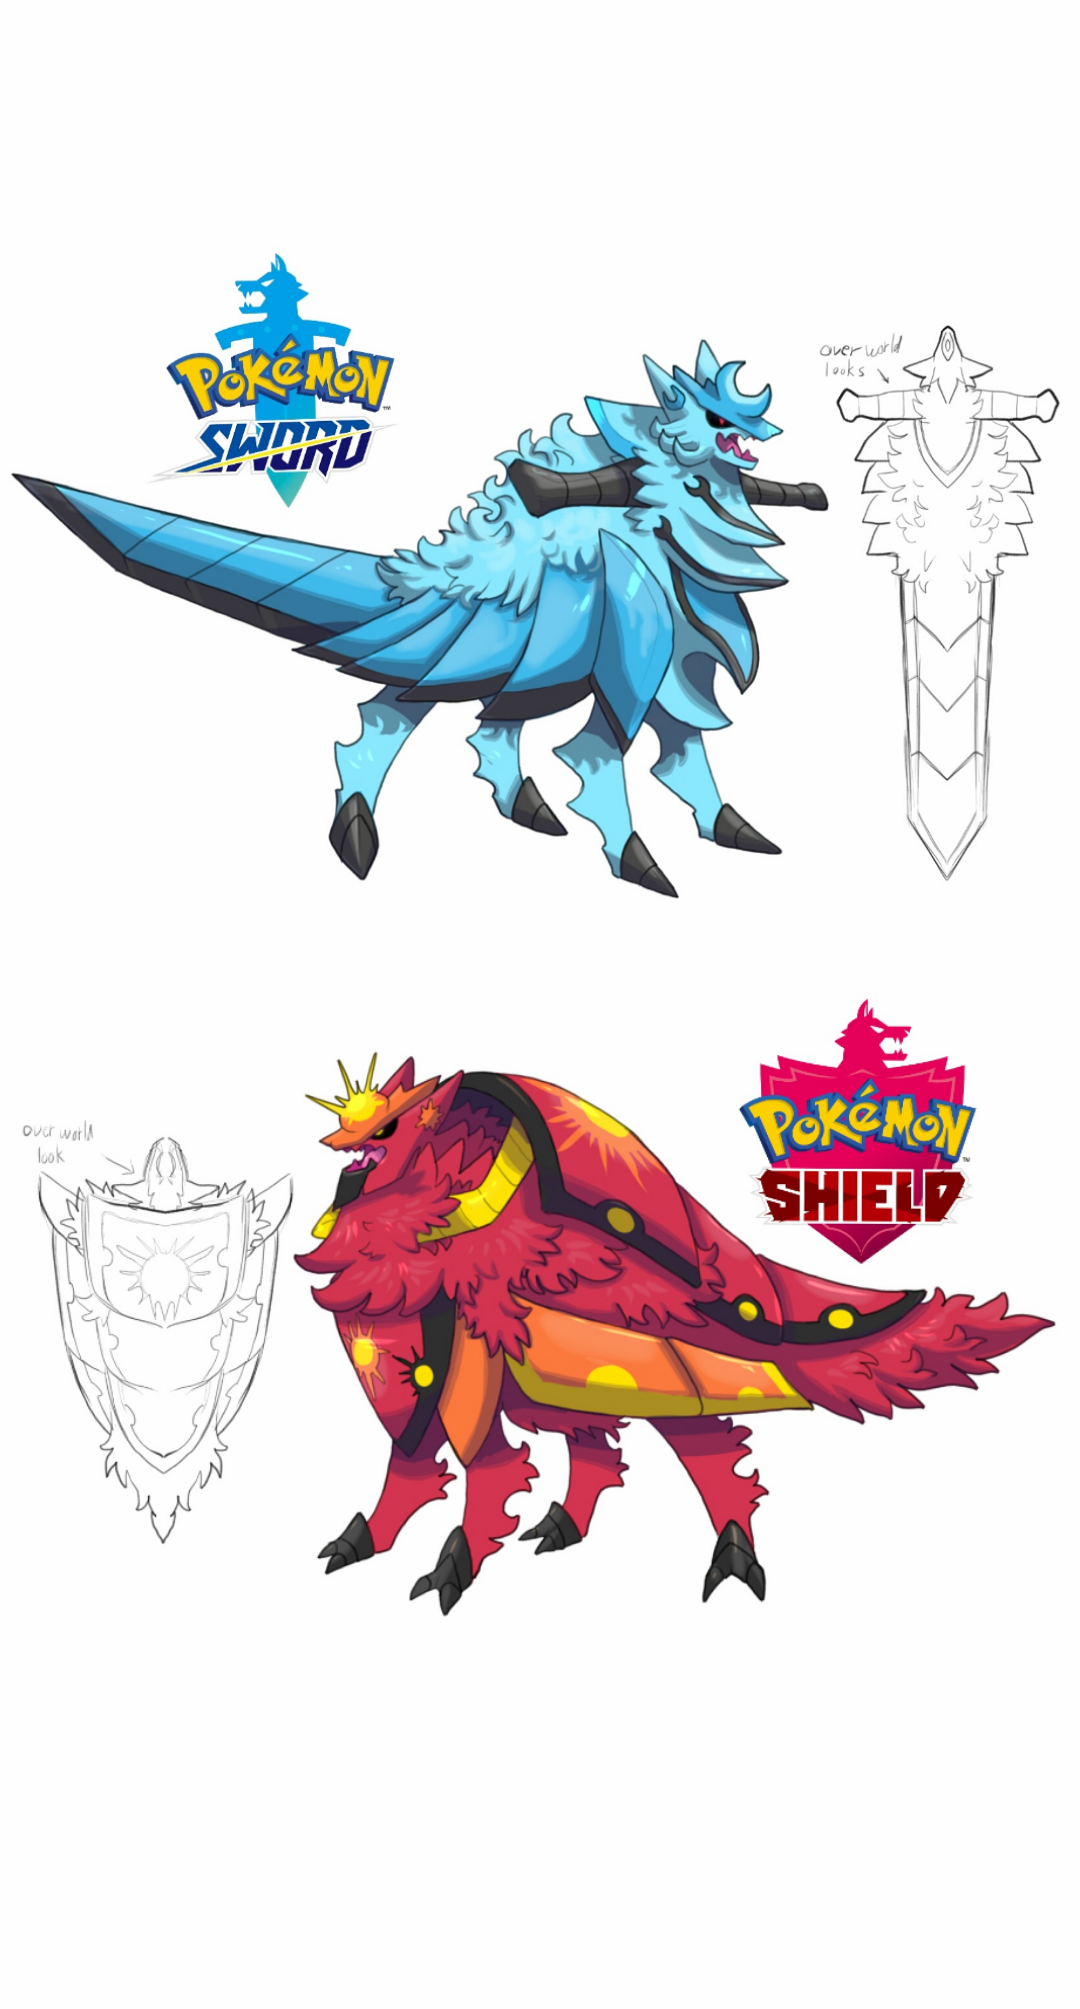 Pokemon Images Pokemon Sword And Shield Official Art Book